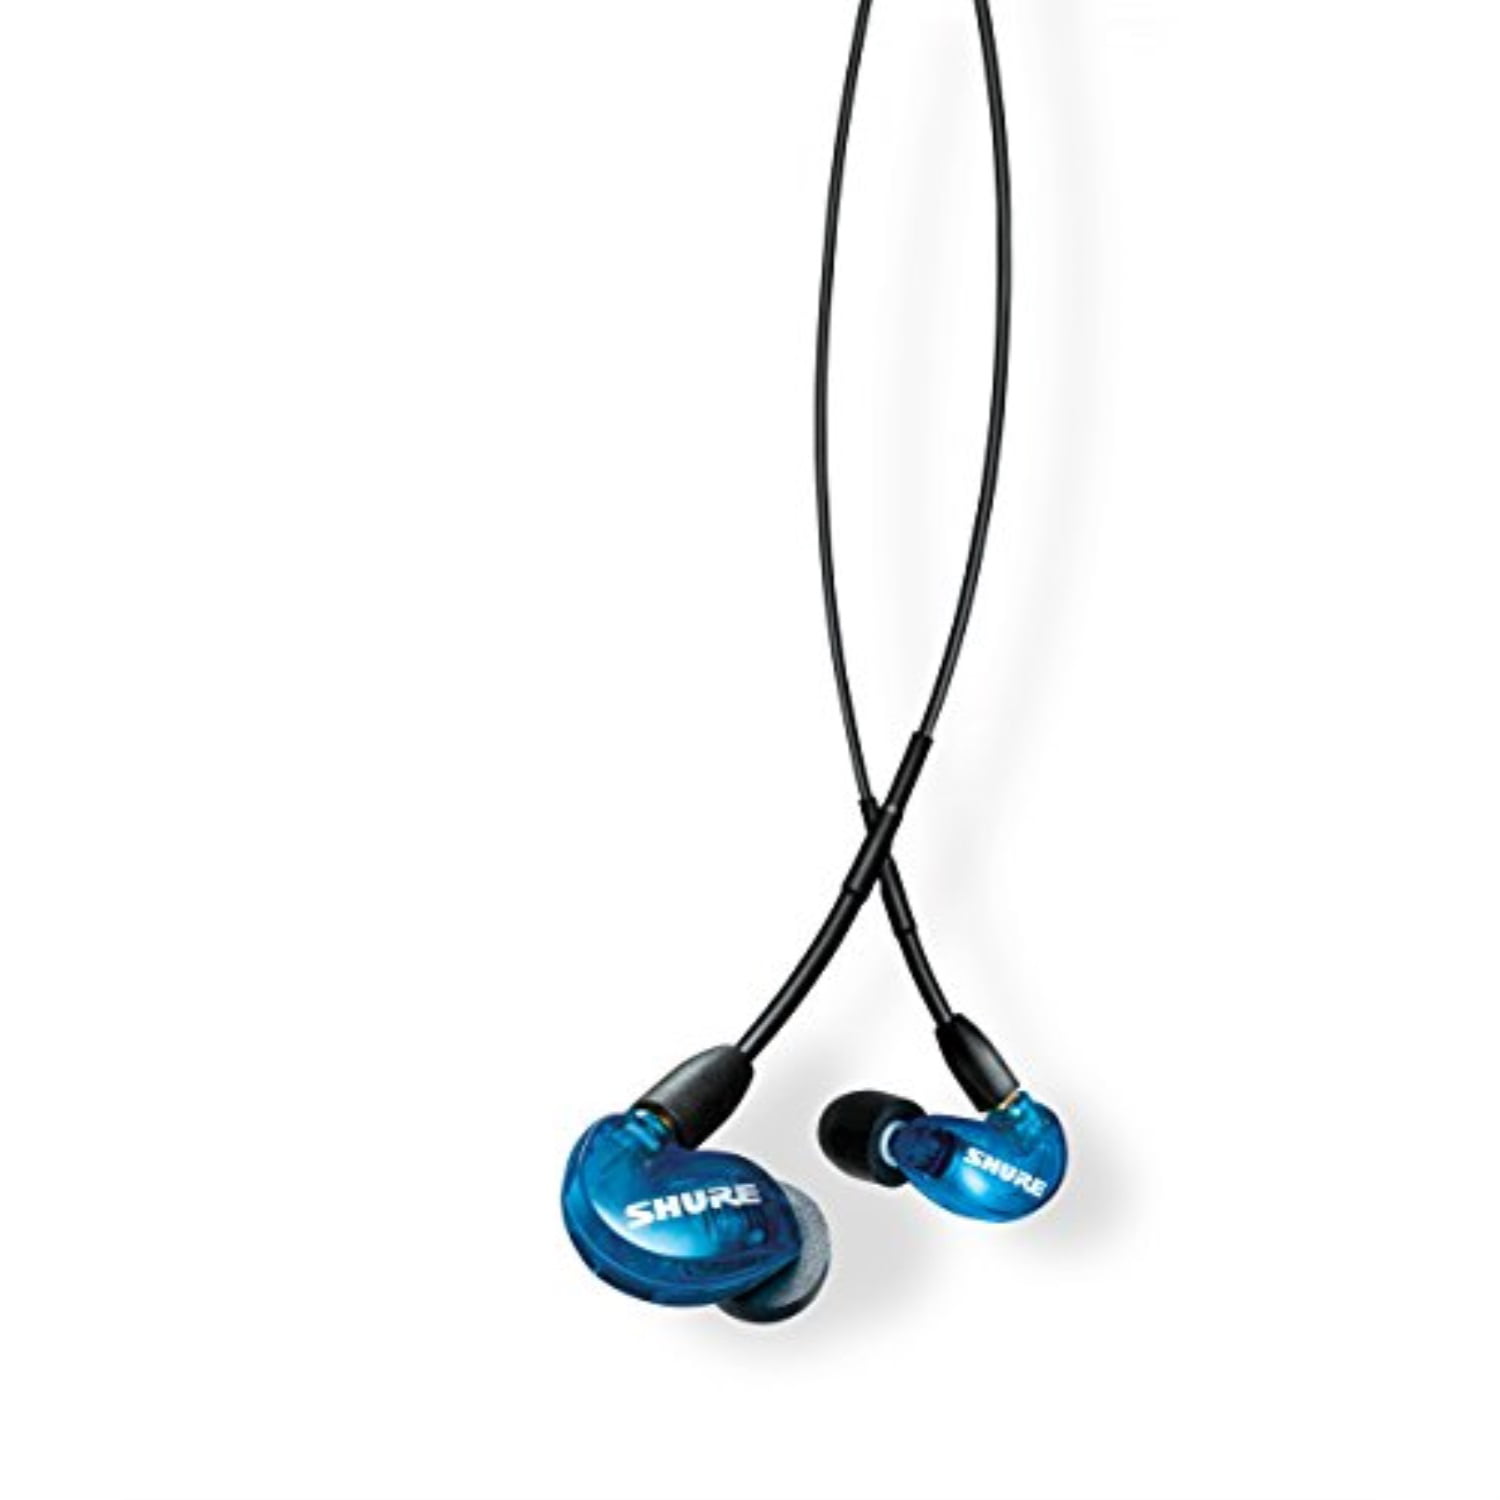 shure se215spe-b-uni special edition sound isolating earphones with